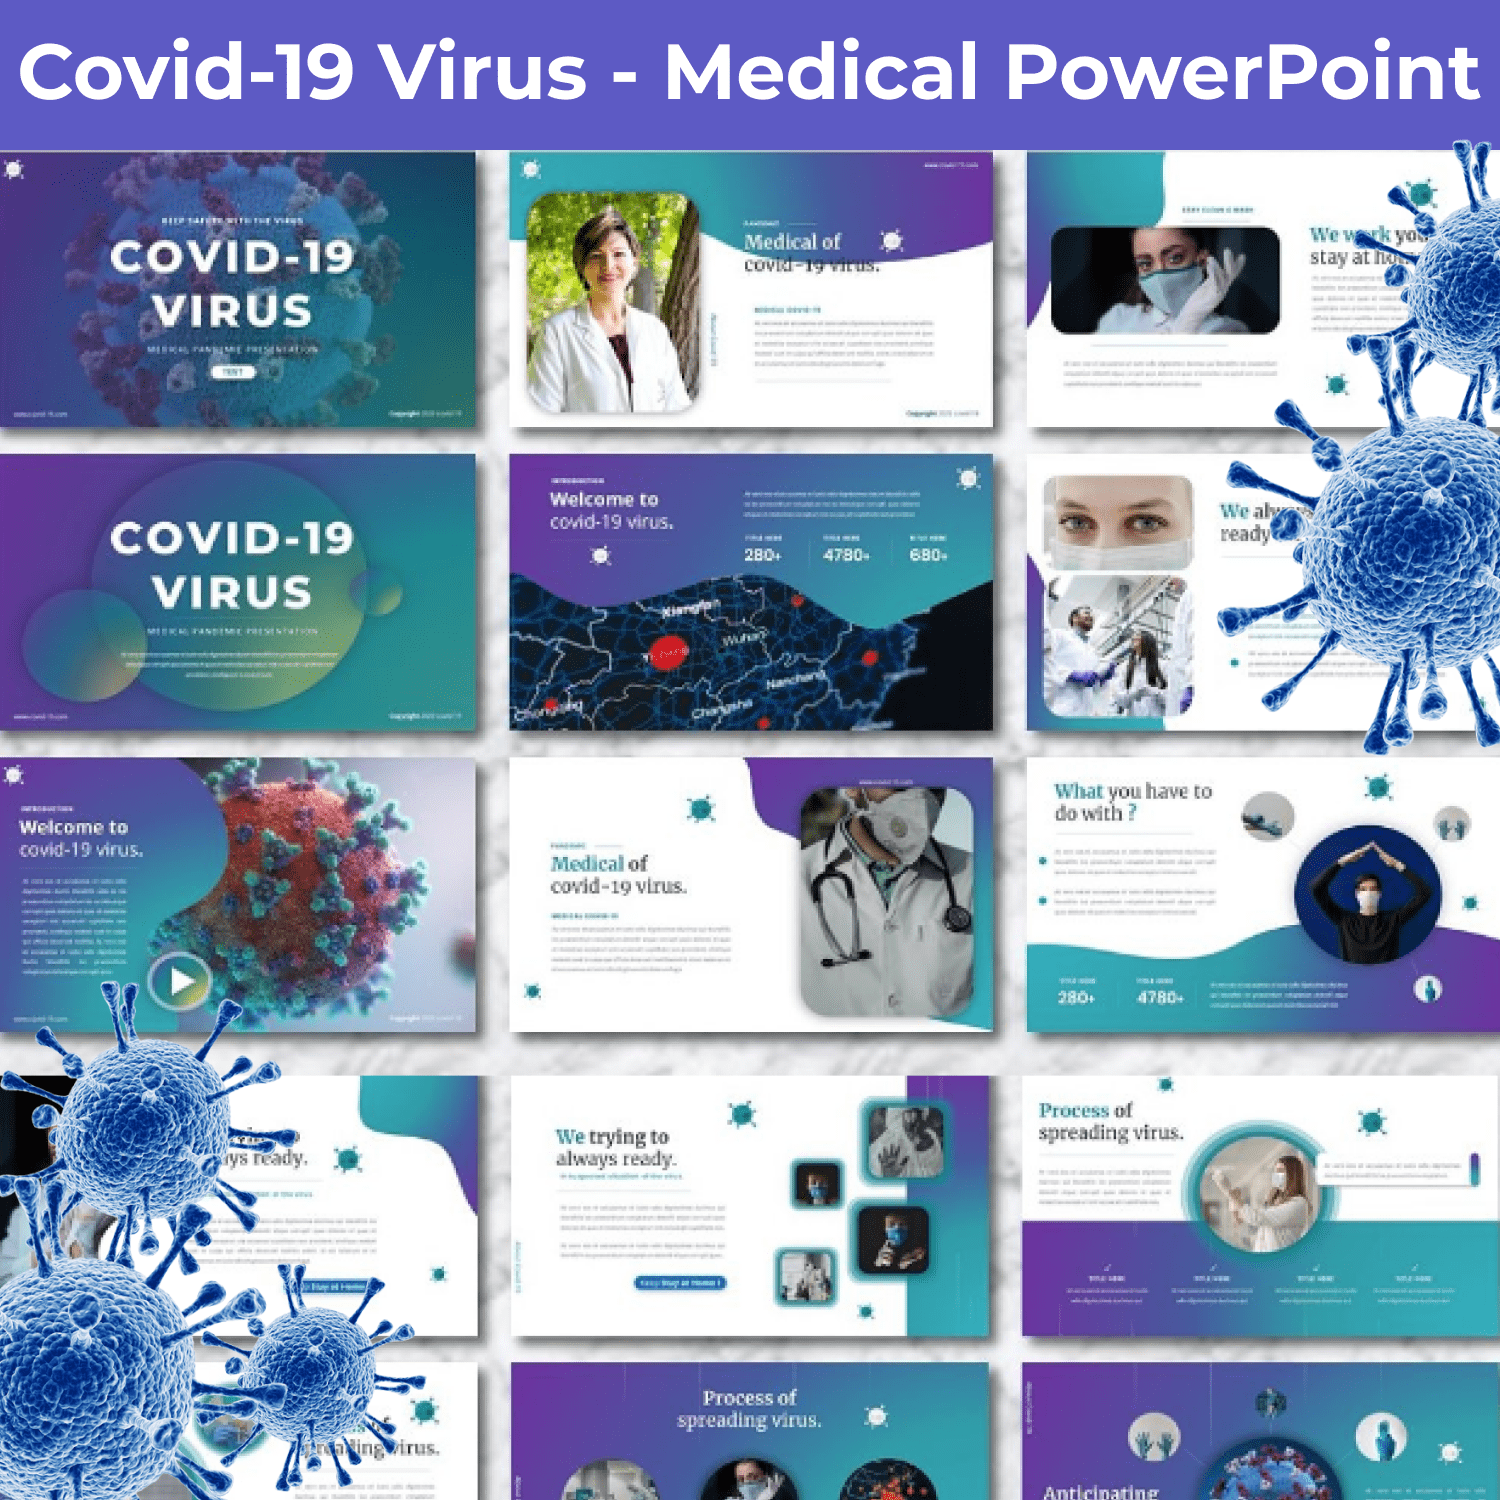 Covid-19 Virus - Medical PowerPoint main cover.